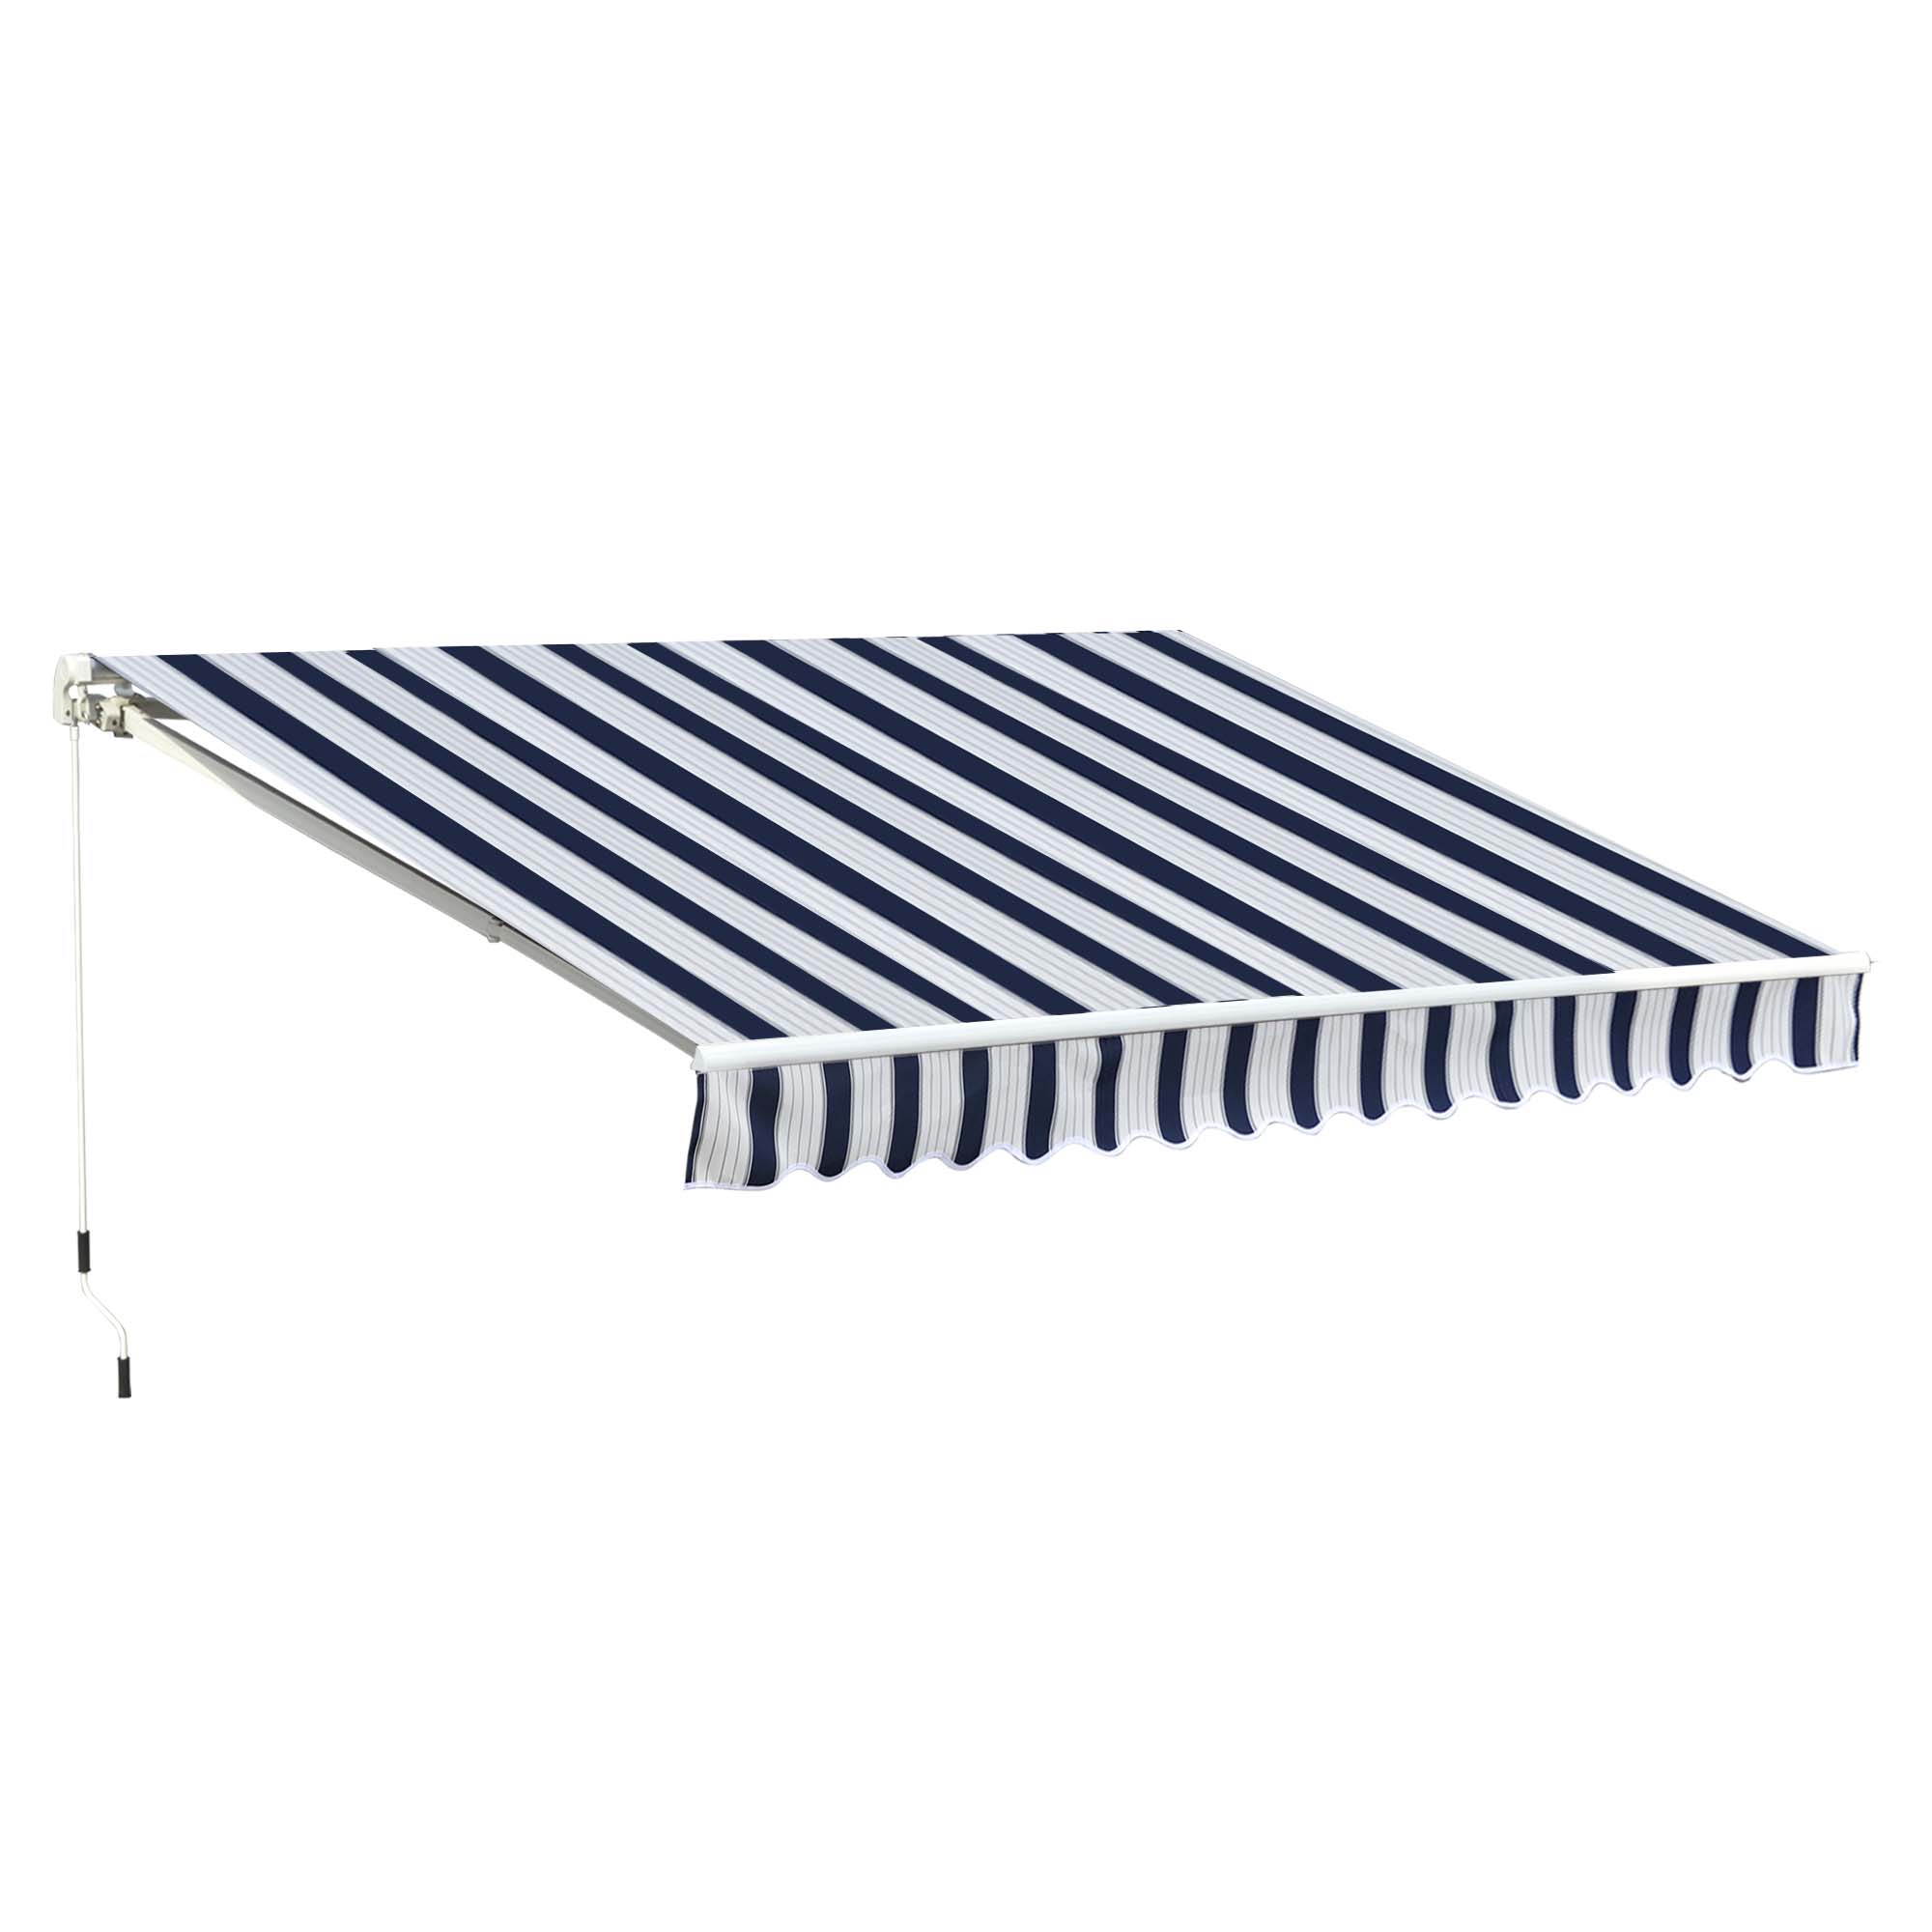 Outsunny Garden Sun Shade Canopy Retractable Awning - 3 x 2.5m - Blue and White  | TJ Hughes